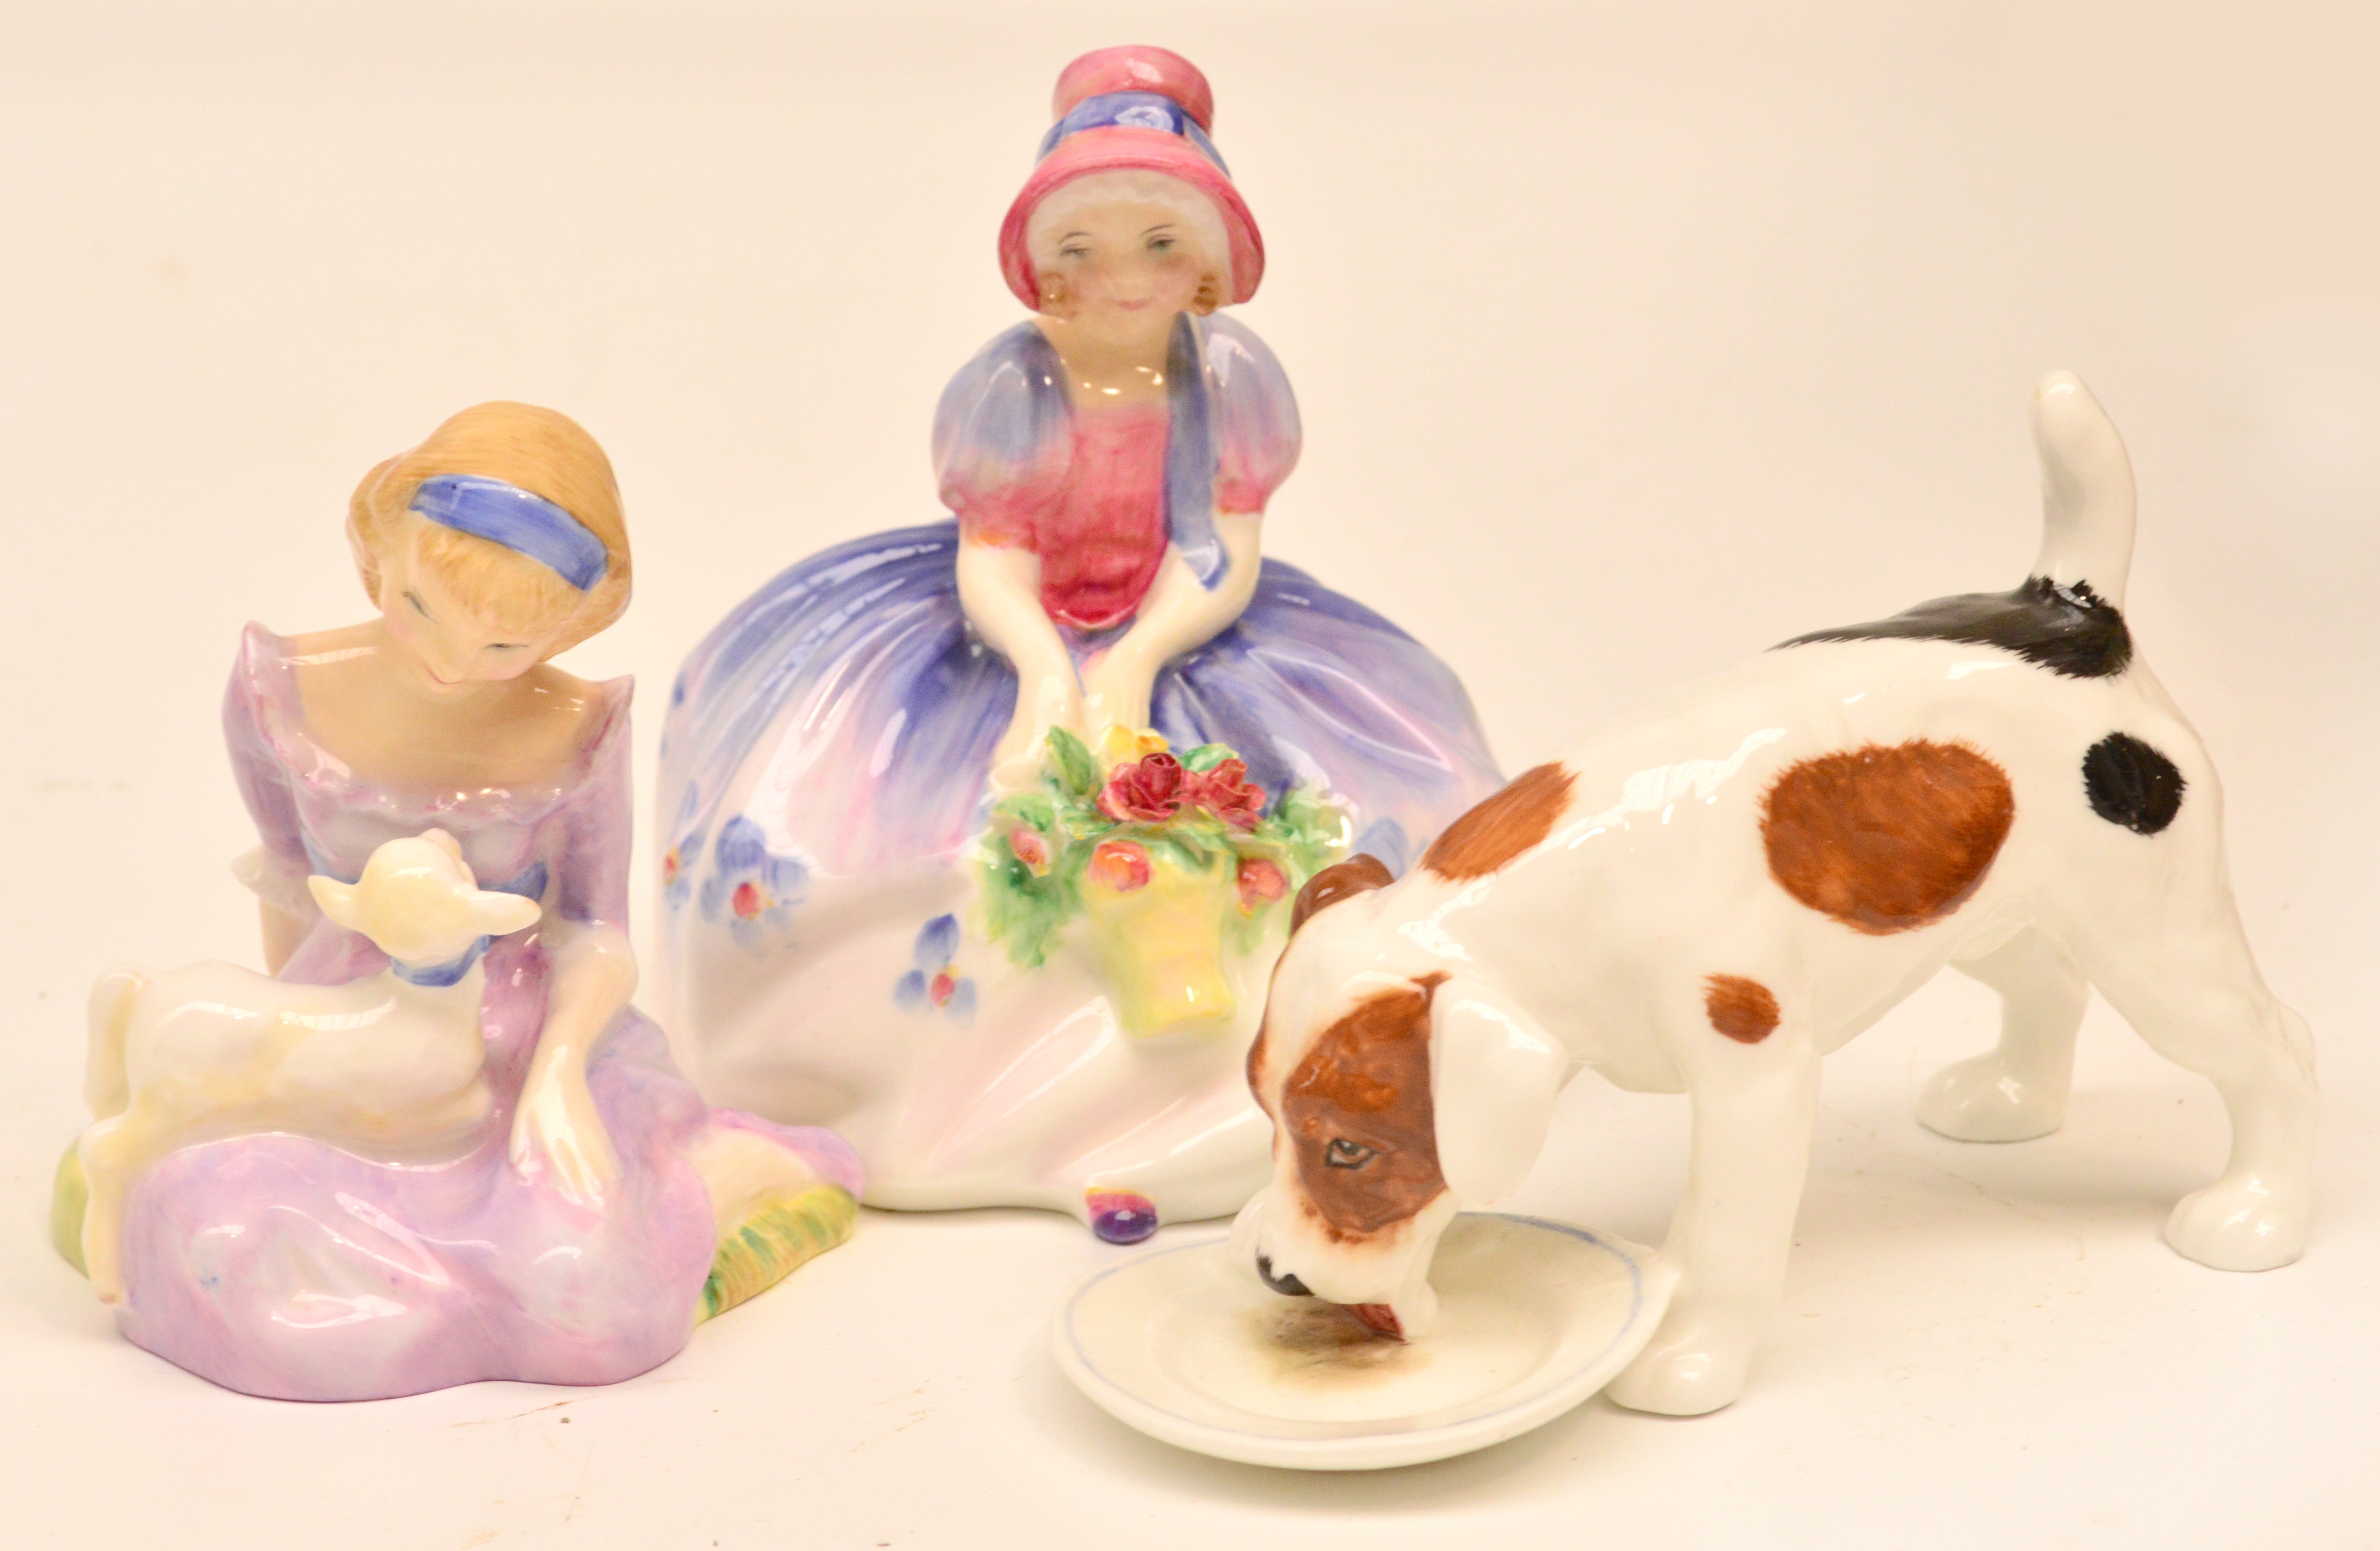 Two Royal Doulton figurines HN2048 "Mary Had A Little Lamb" and HN1467 "Monica", also a Royal